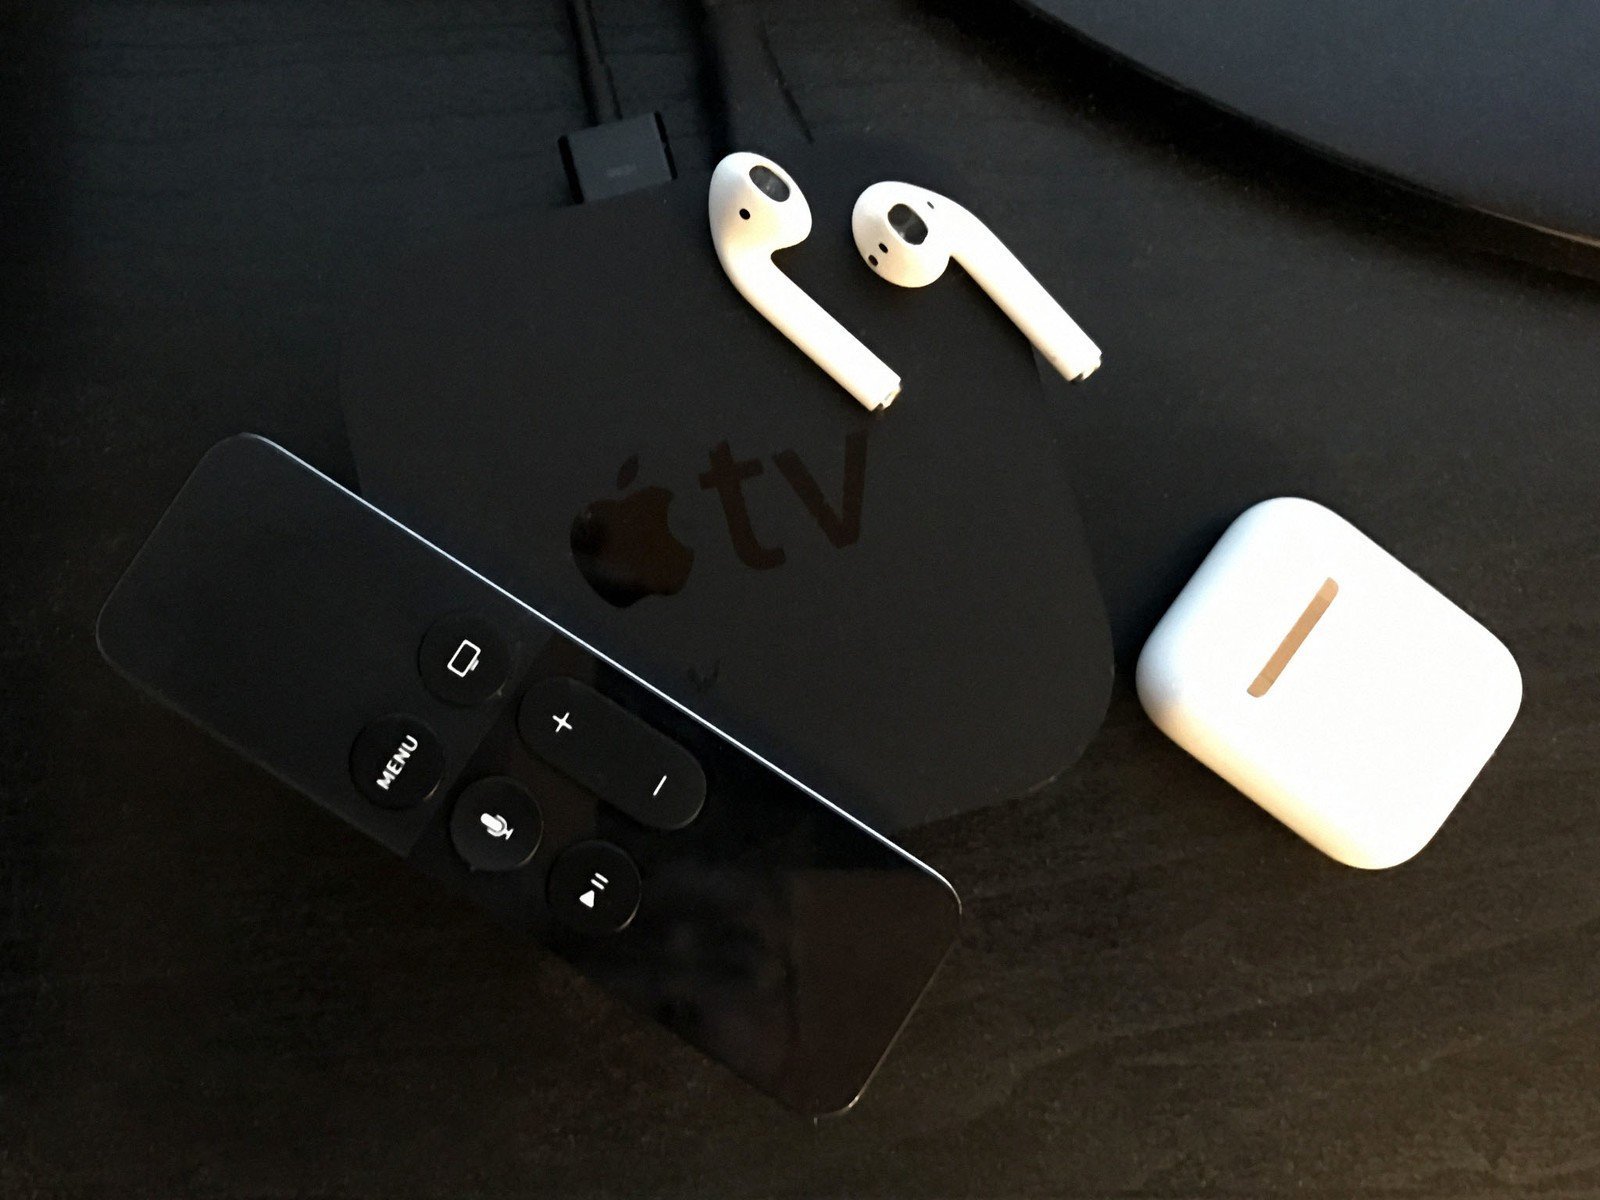 You can automagically connect AirPods to your Apple TV in ...